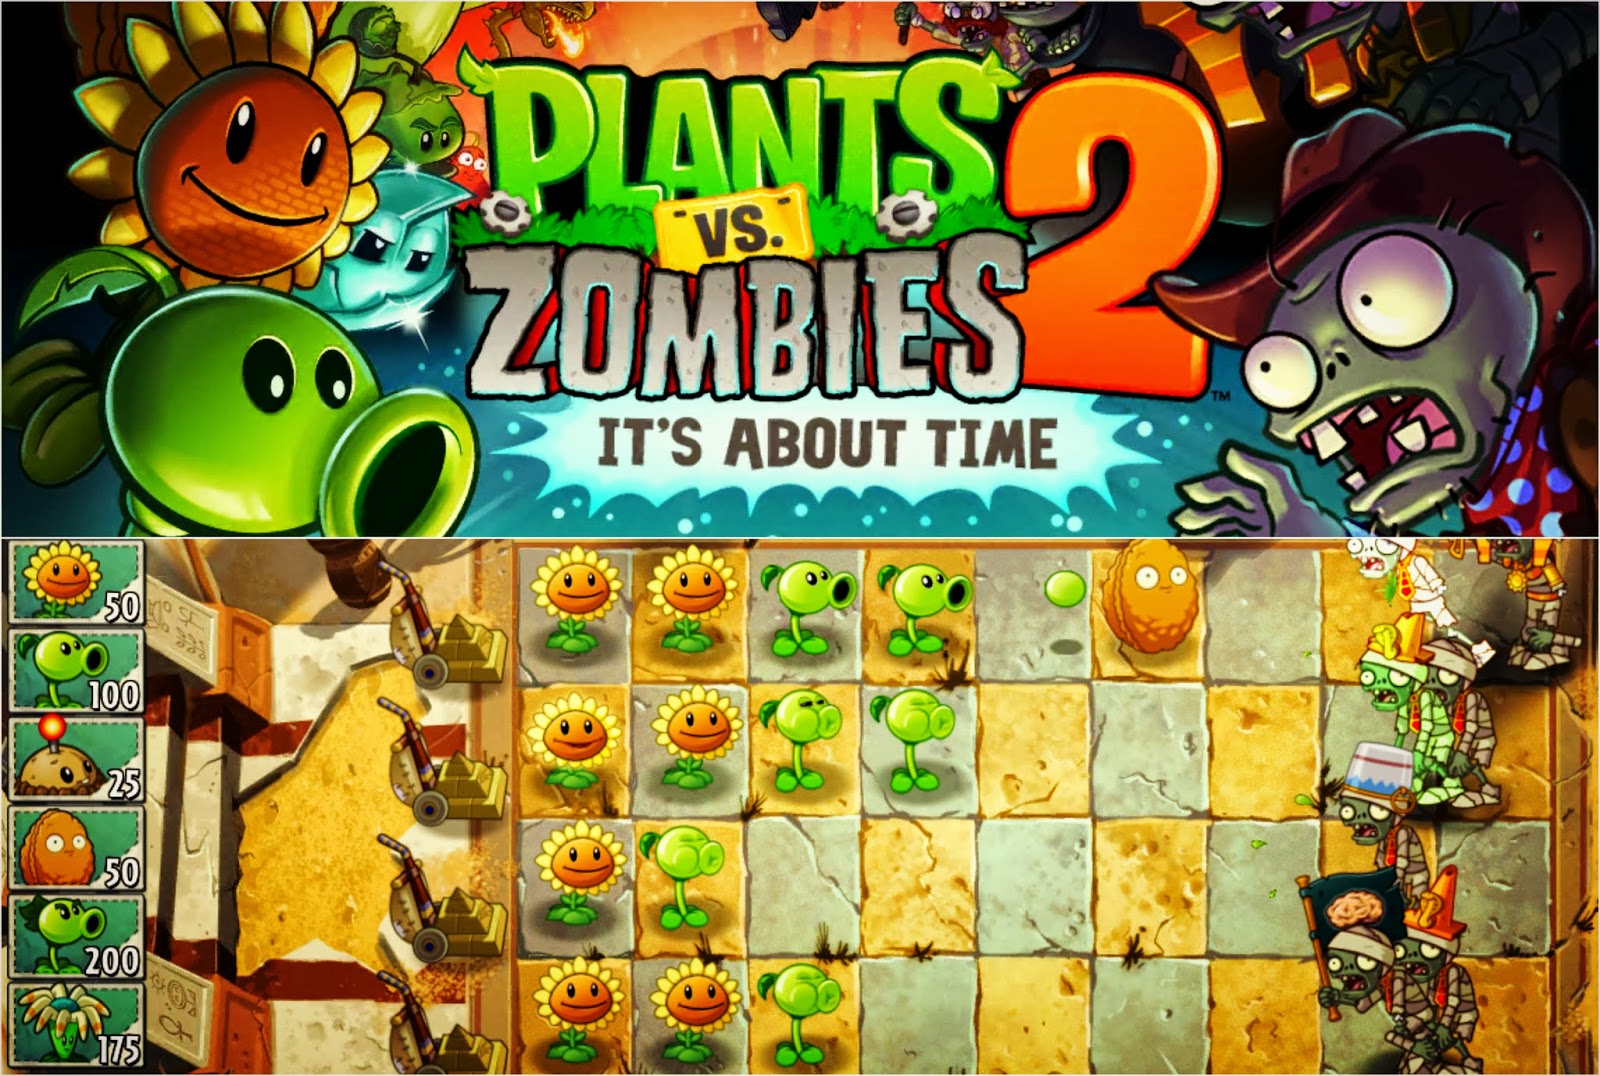 Oh Yes Finally! Plant vs. Zombies 2: It's about time! ~ A Trip to Happy Life